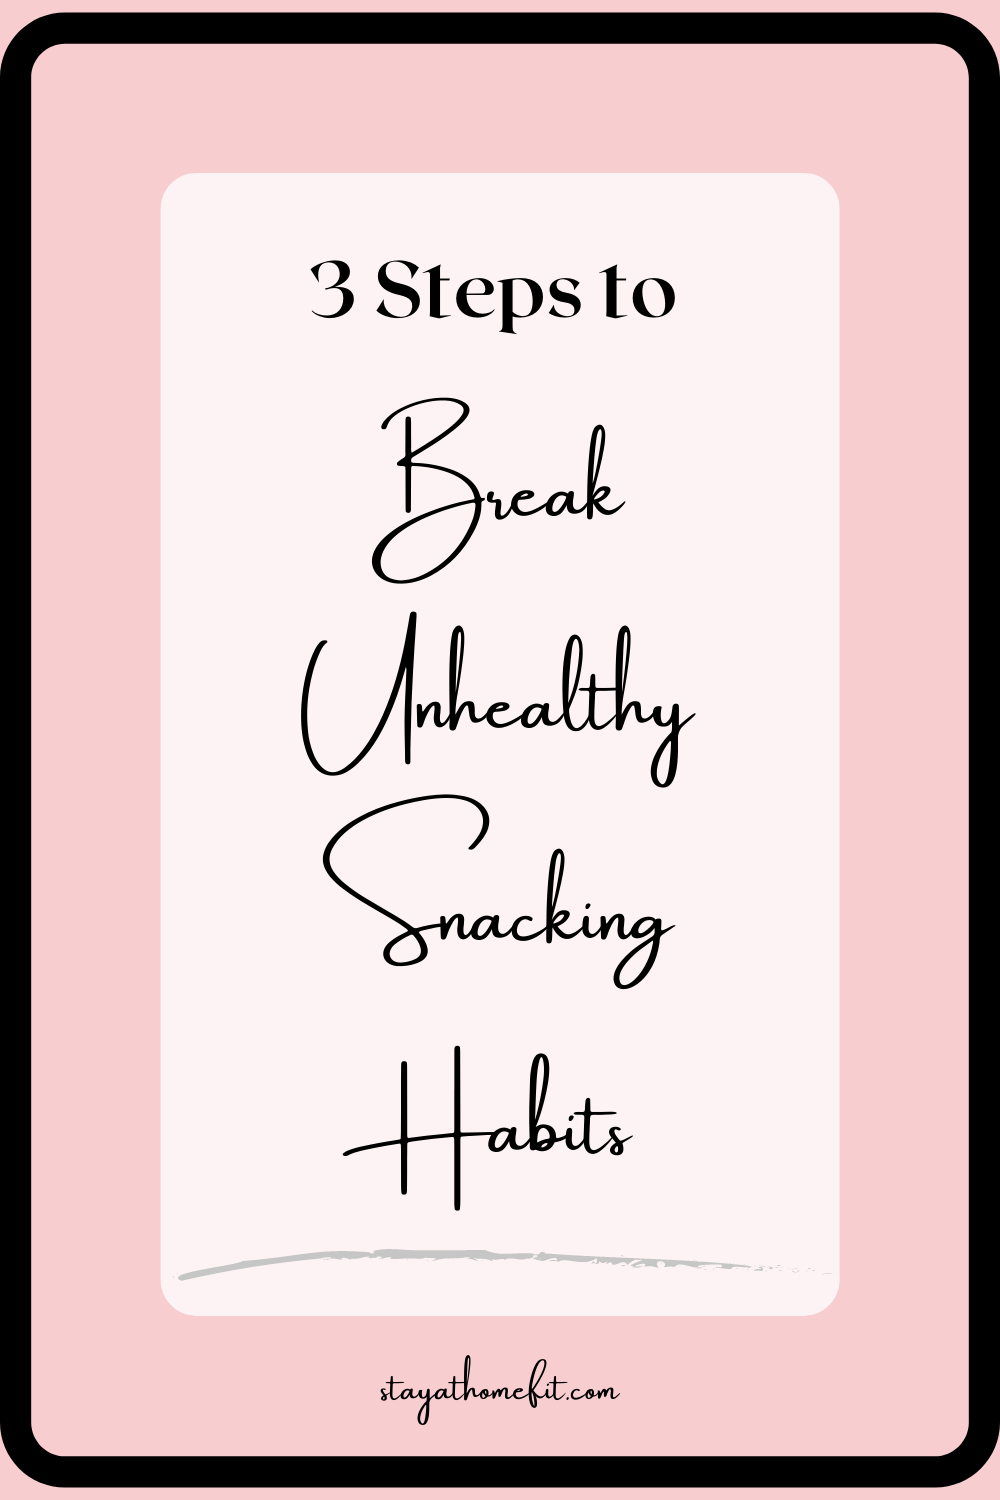 Pinterest Graphic: 3 Steps to Break Unhealthy Snacking Habits